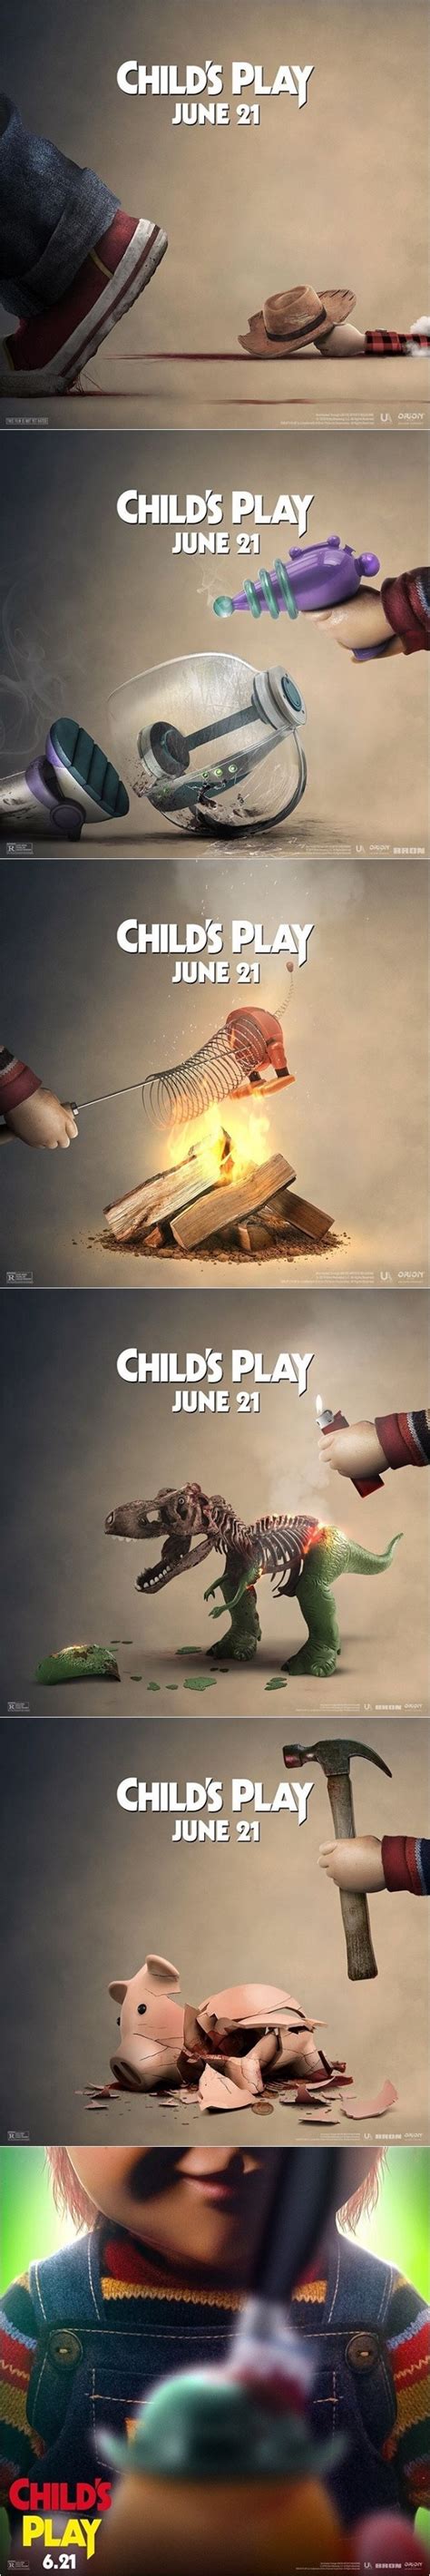 Toy Story 4 And Childs Play 2019 Are Opening The Same Day And Child